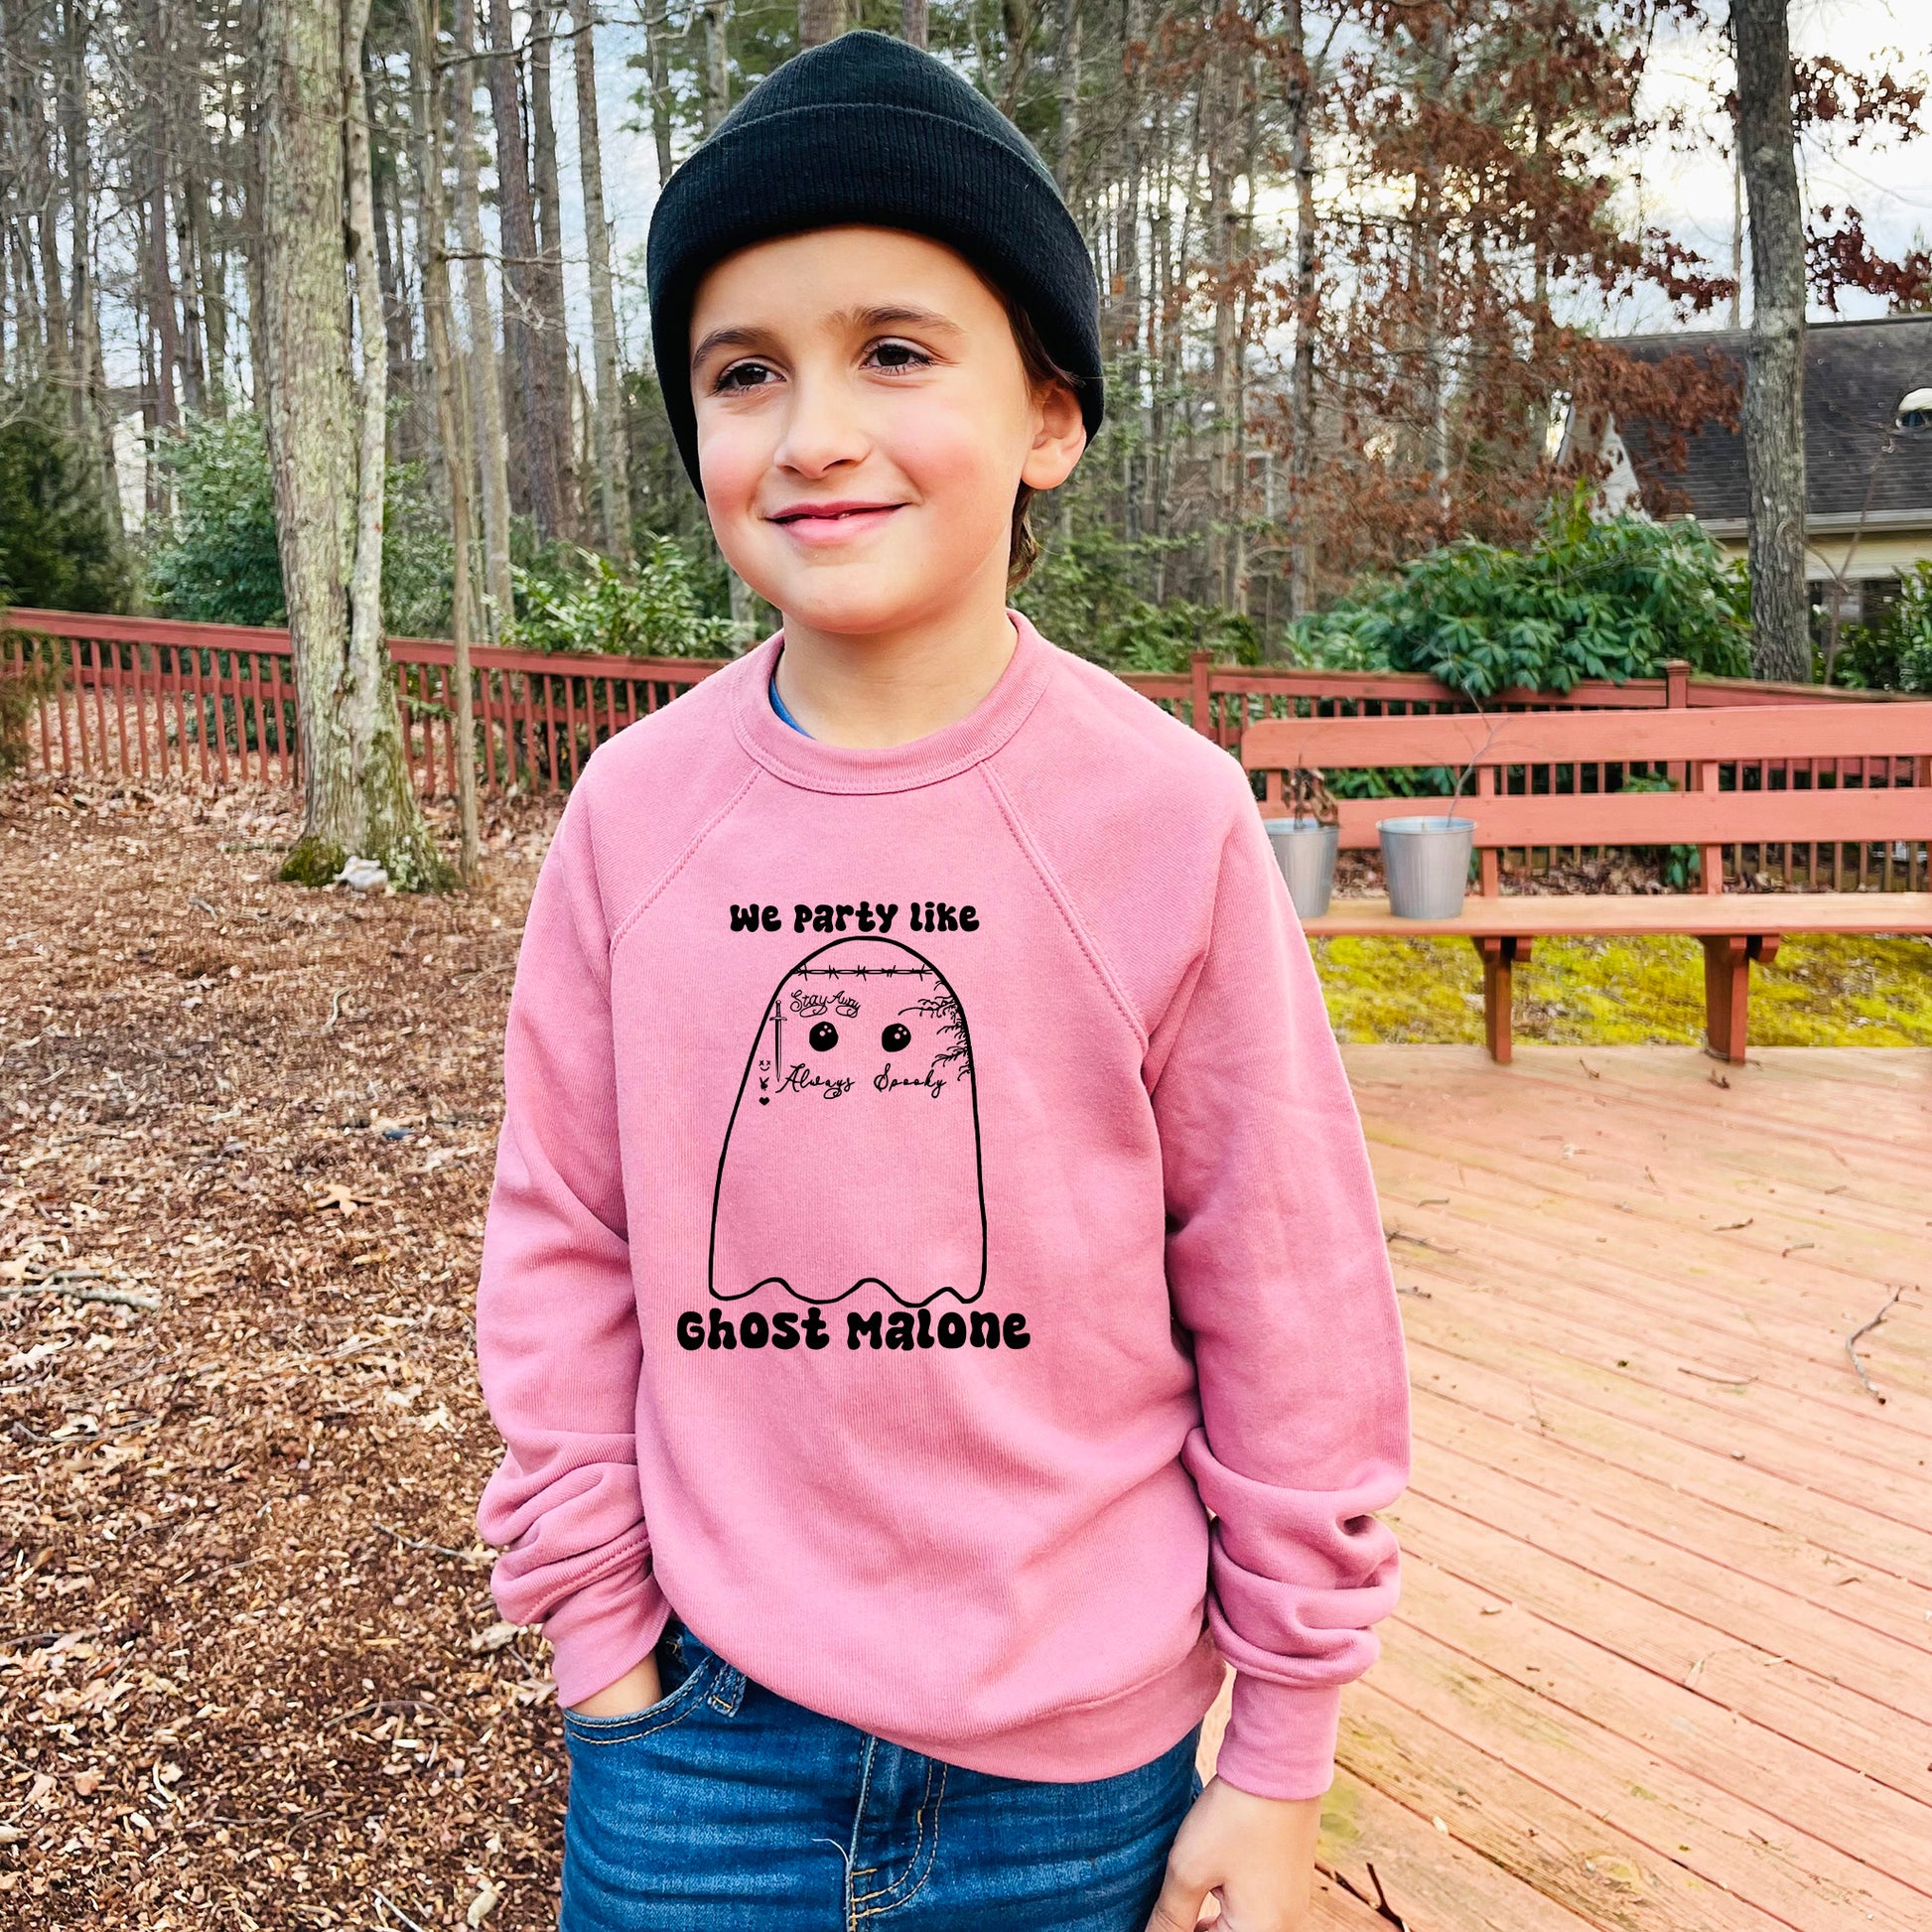 a young boy standing on a deck wearing a pink sweatshirt